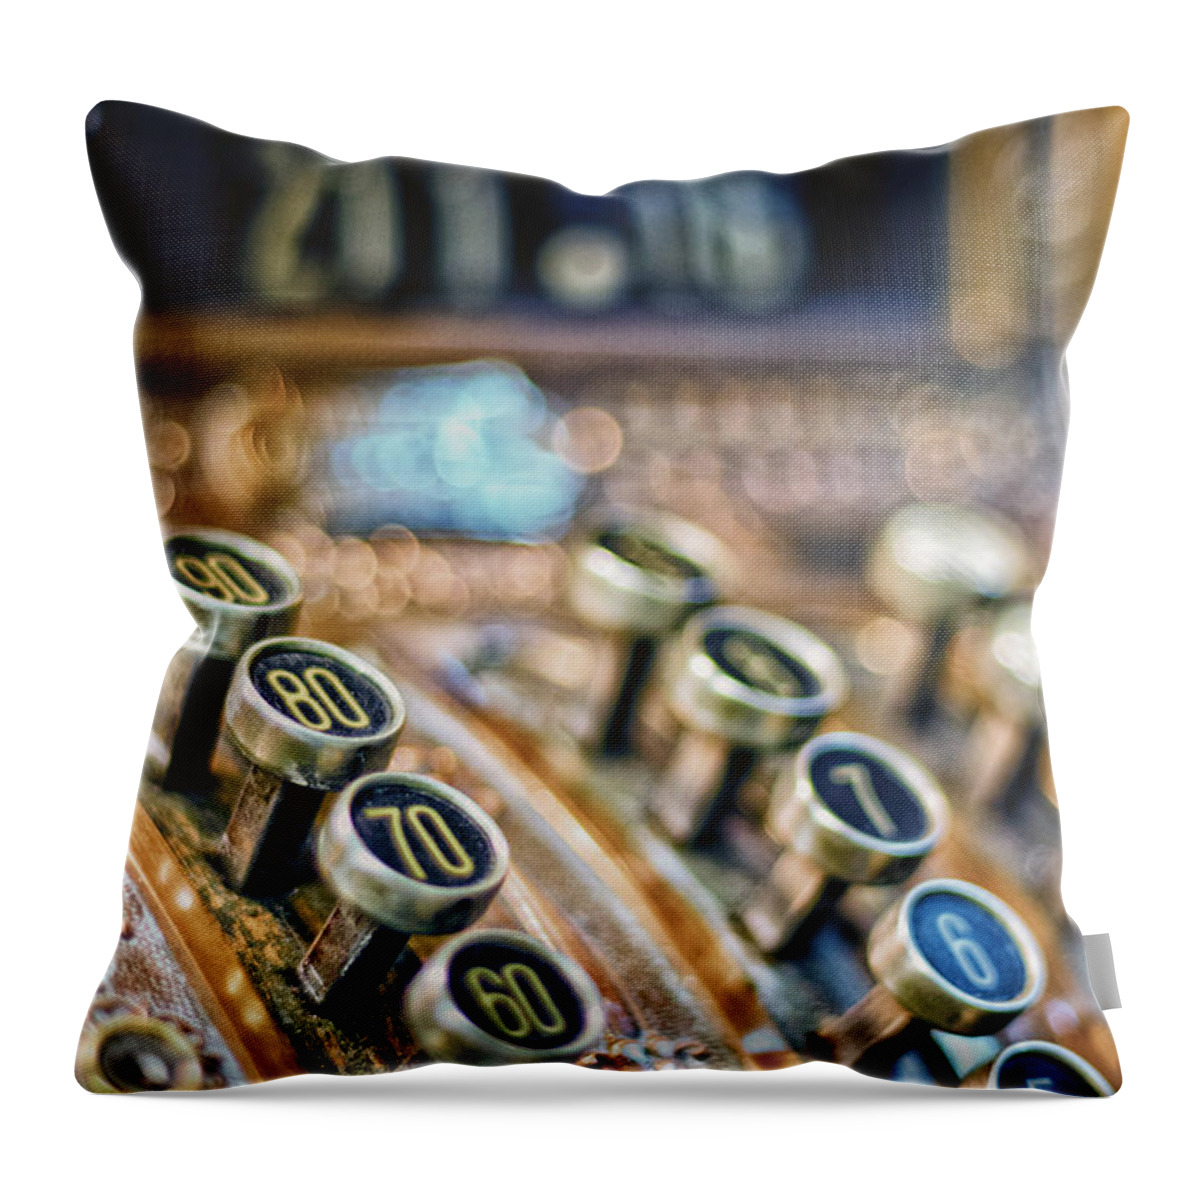 Old Throw Pillow featuring the photograph Old Times Cash Register by Pablo Lopez